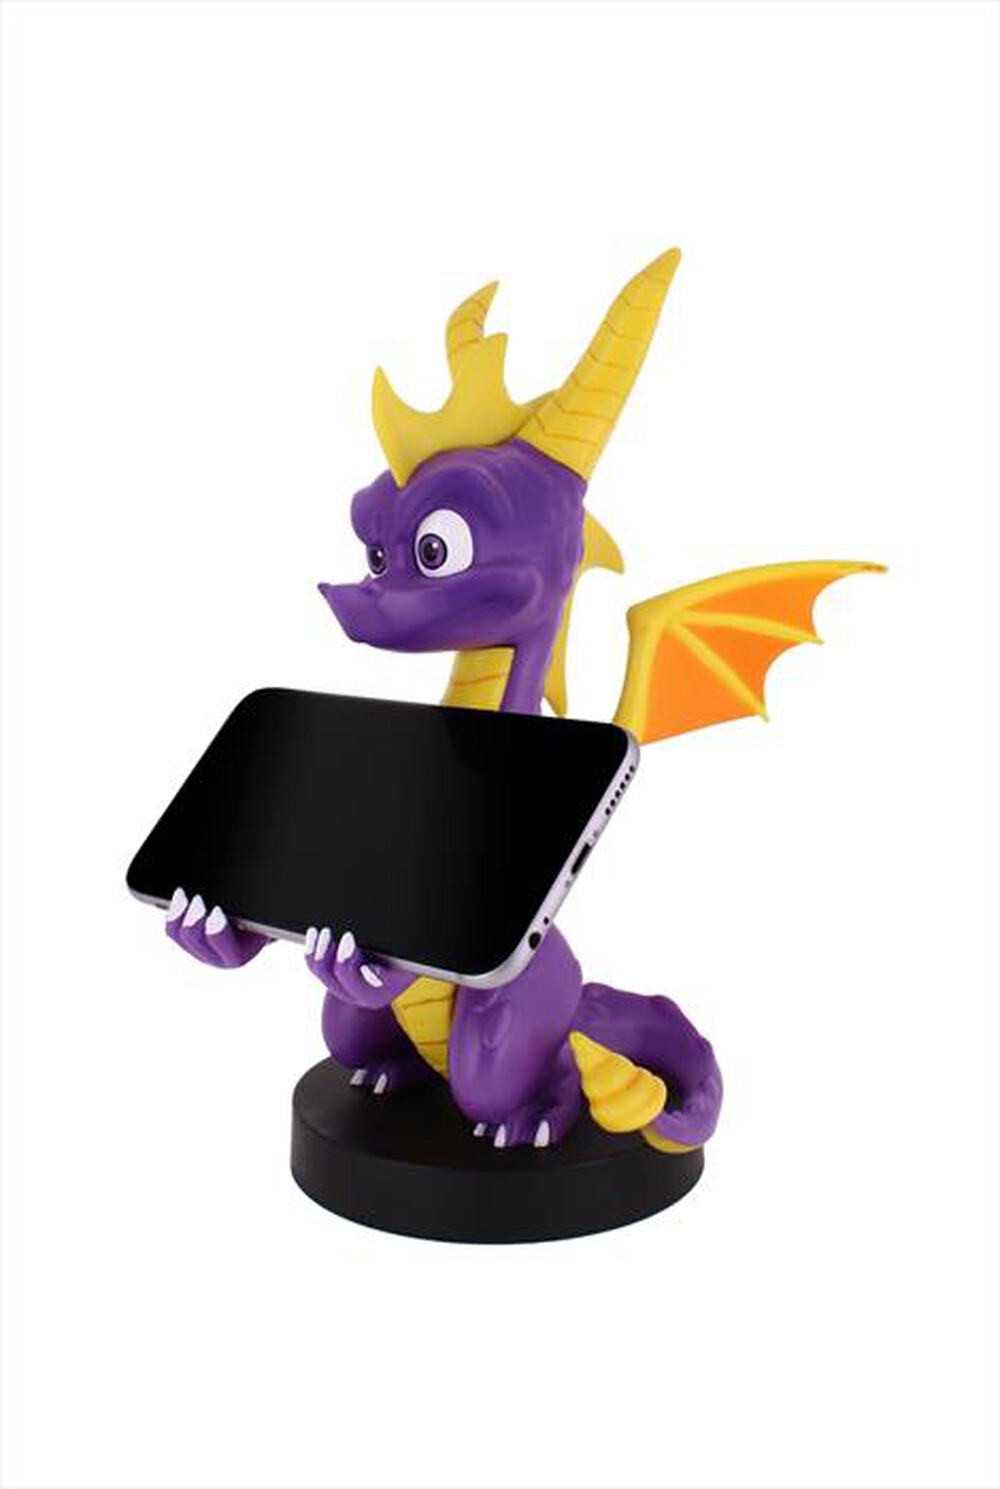 "EXQUISITE GAMING - SPYRO NEW CABLE GUY"